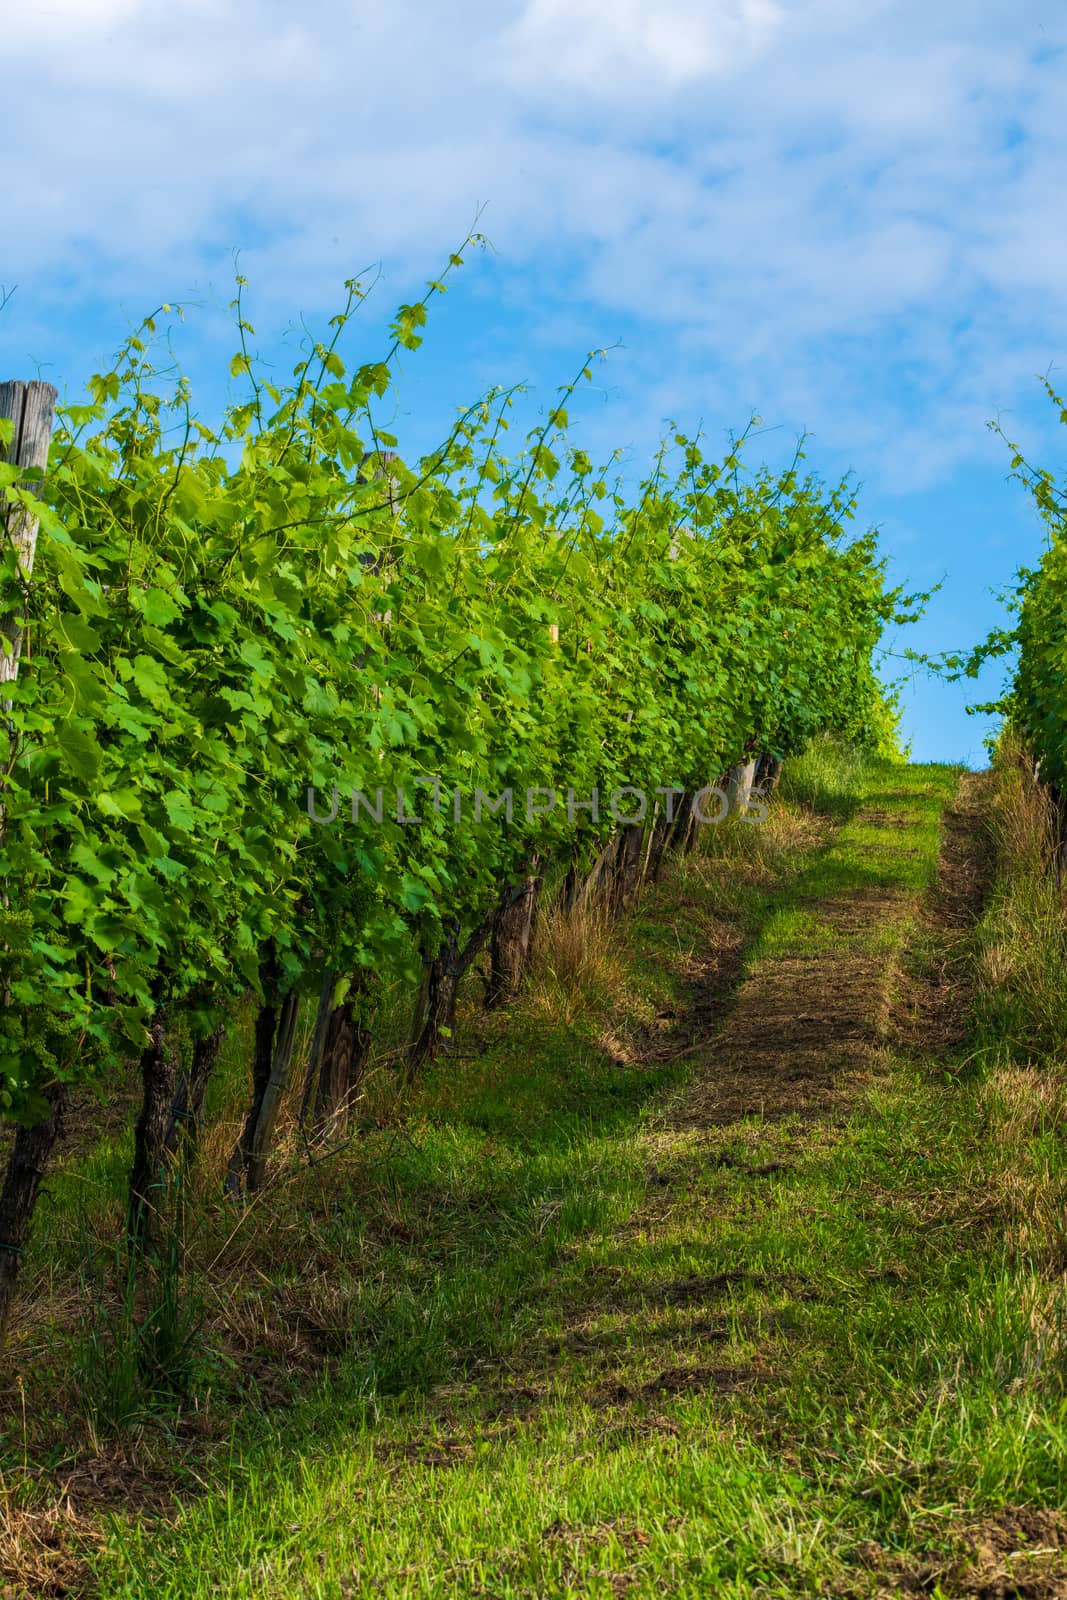 Vineyard in summer morning, grape vines planted in rows, Europe, european landscape, touristic and travel destination in rural countrzside